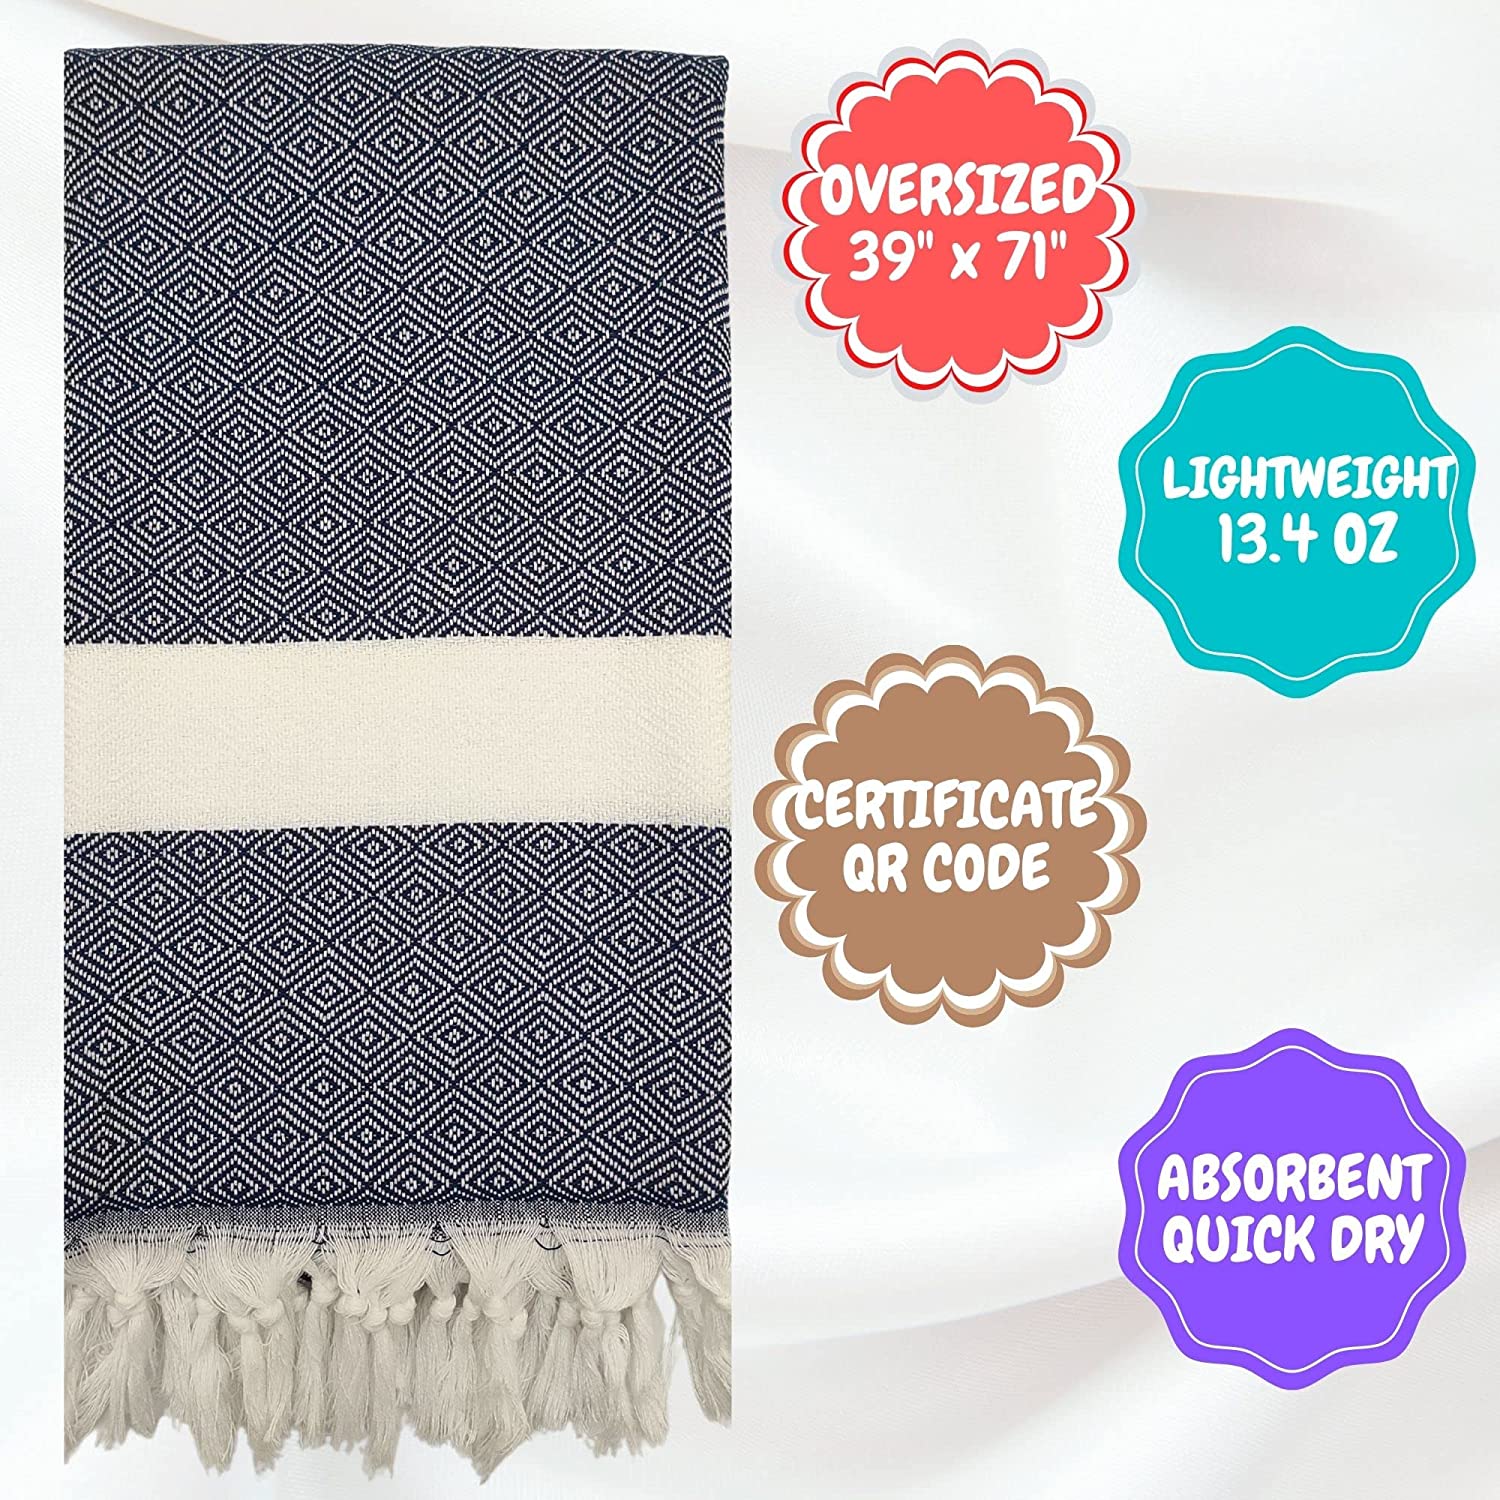 Erbulus Turkish Beach Towel (39" x 71") - 100% Cotton - Certified Free of Harmful Chemicals - Absorbent and Quick Dry - Yoga Blanket - Peshtemal Turkish Bath Towel for SPA, Pool, Gym (Navy) - image 2 of 6